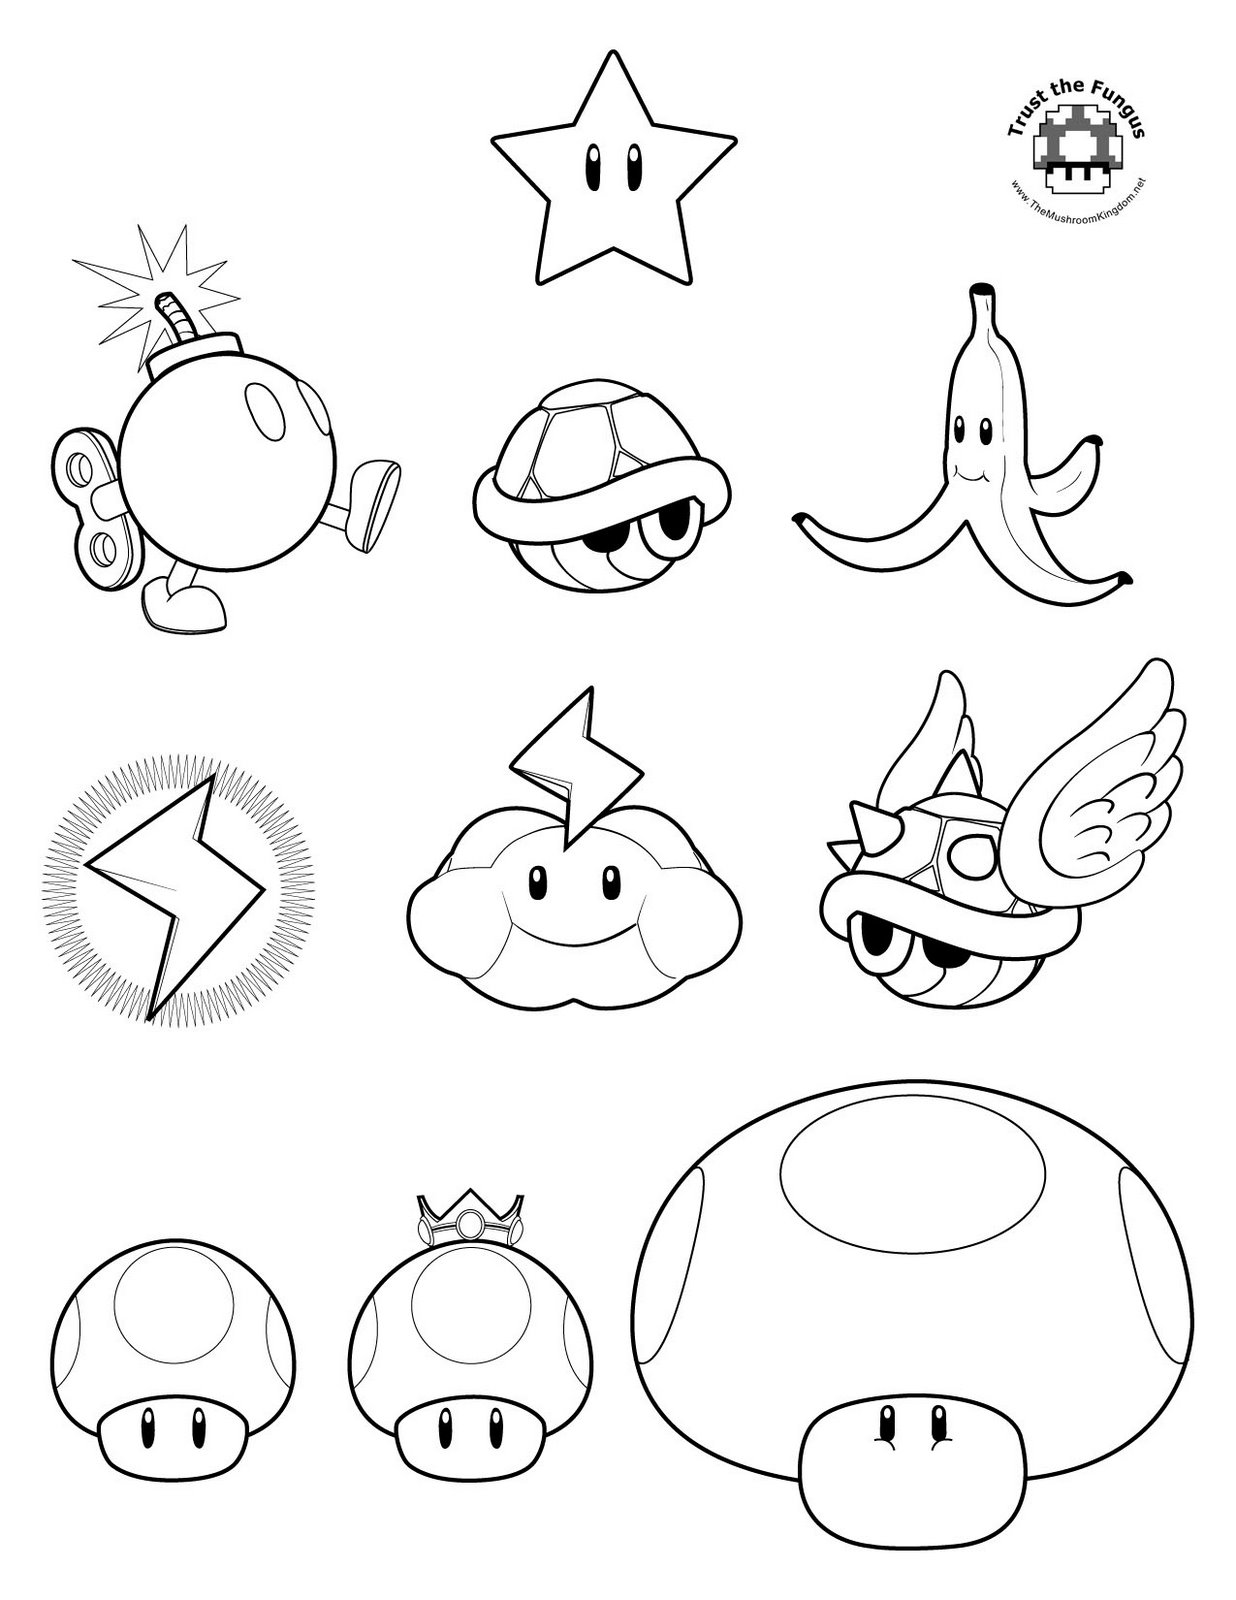 Mario Coloring pages - Black and white super Mario drawings for you to color in